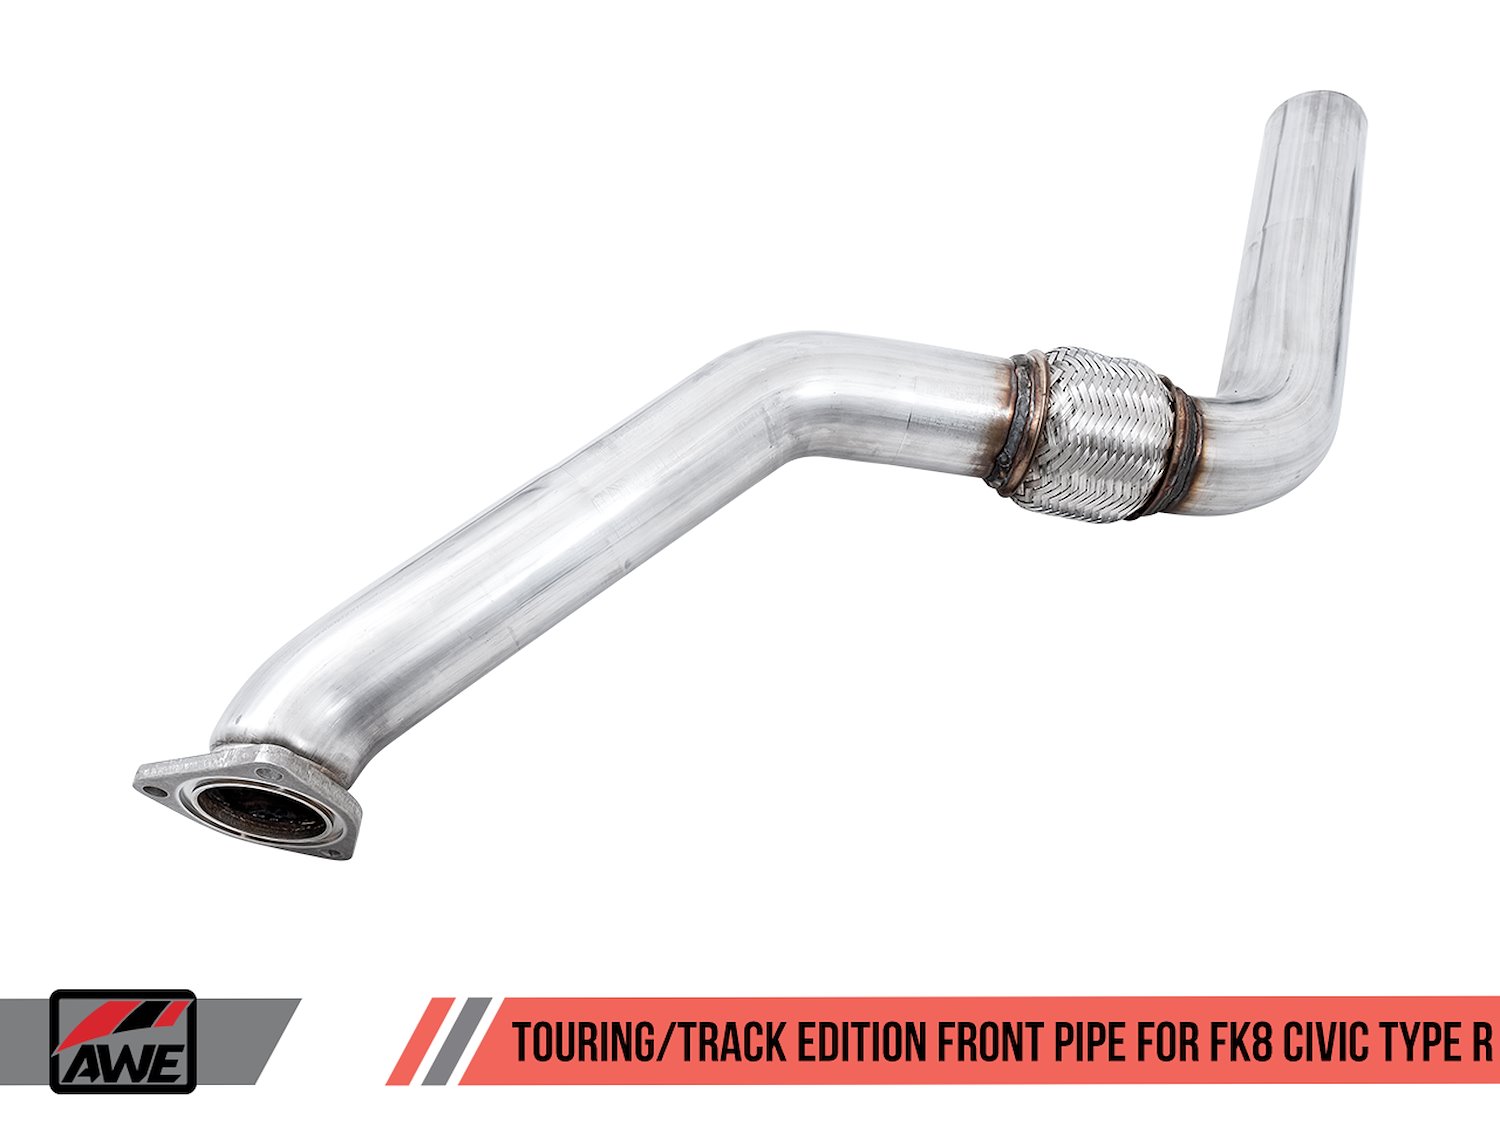 AWE Track Edition Exhaust for FK8 Civic Type R (includes Front Pipe) - Triple Diamond Black Tips